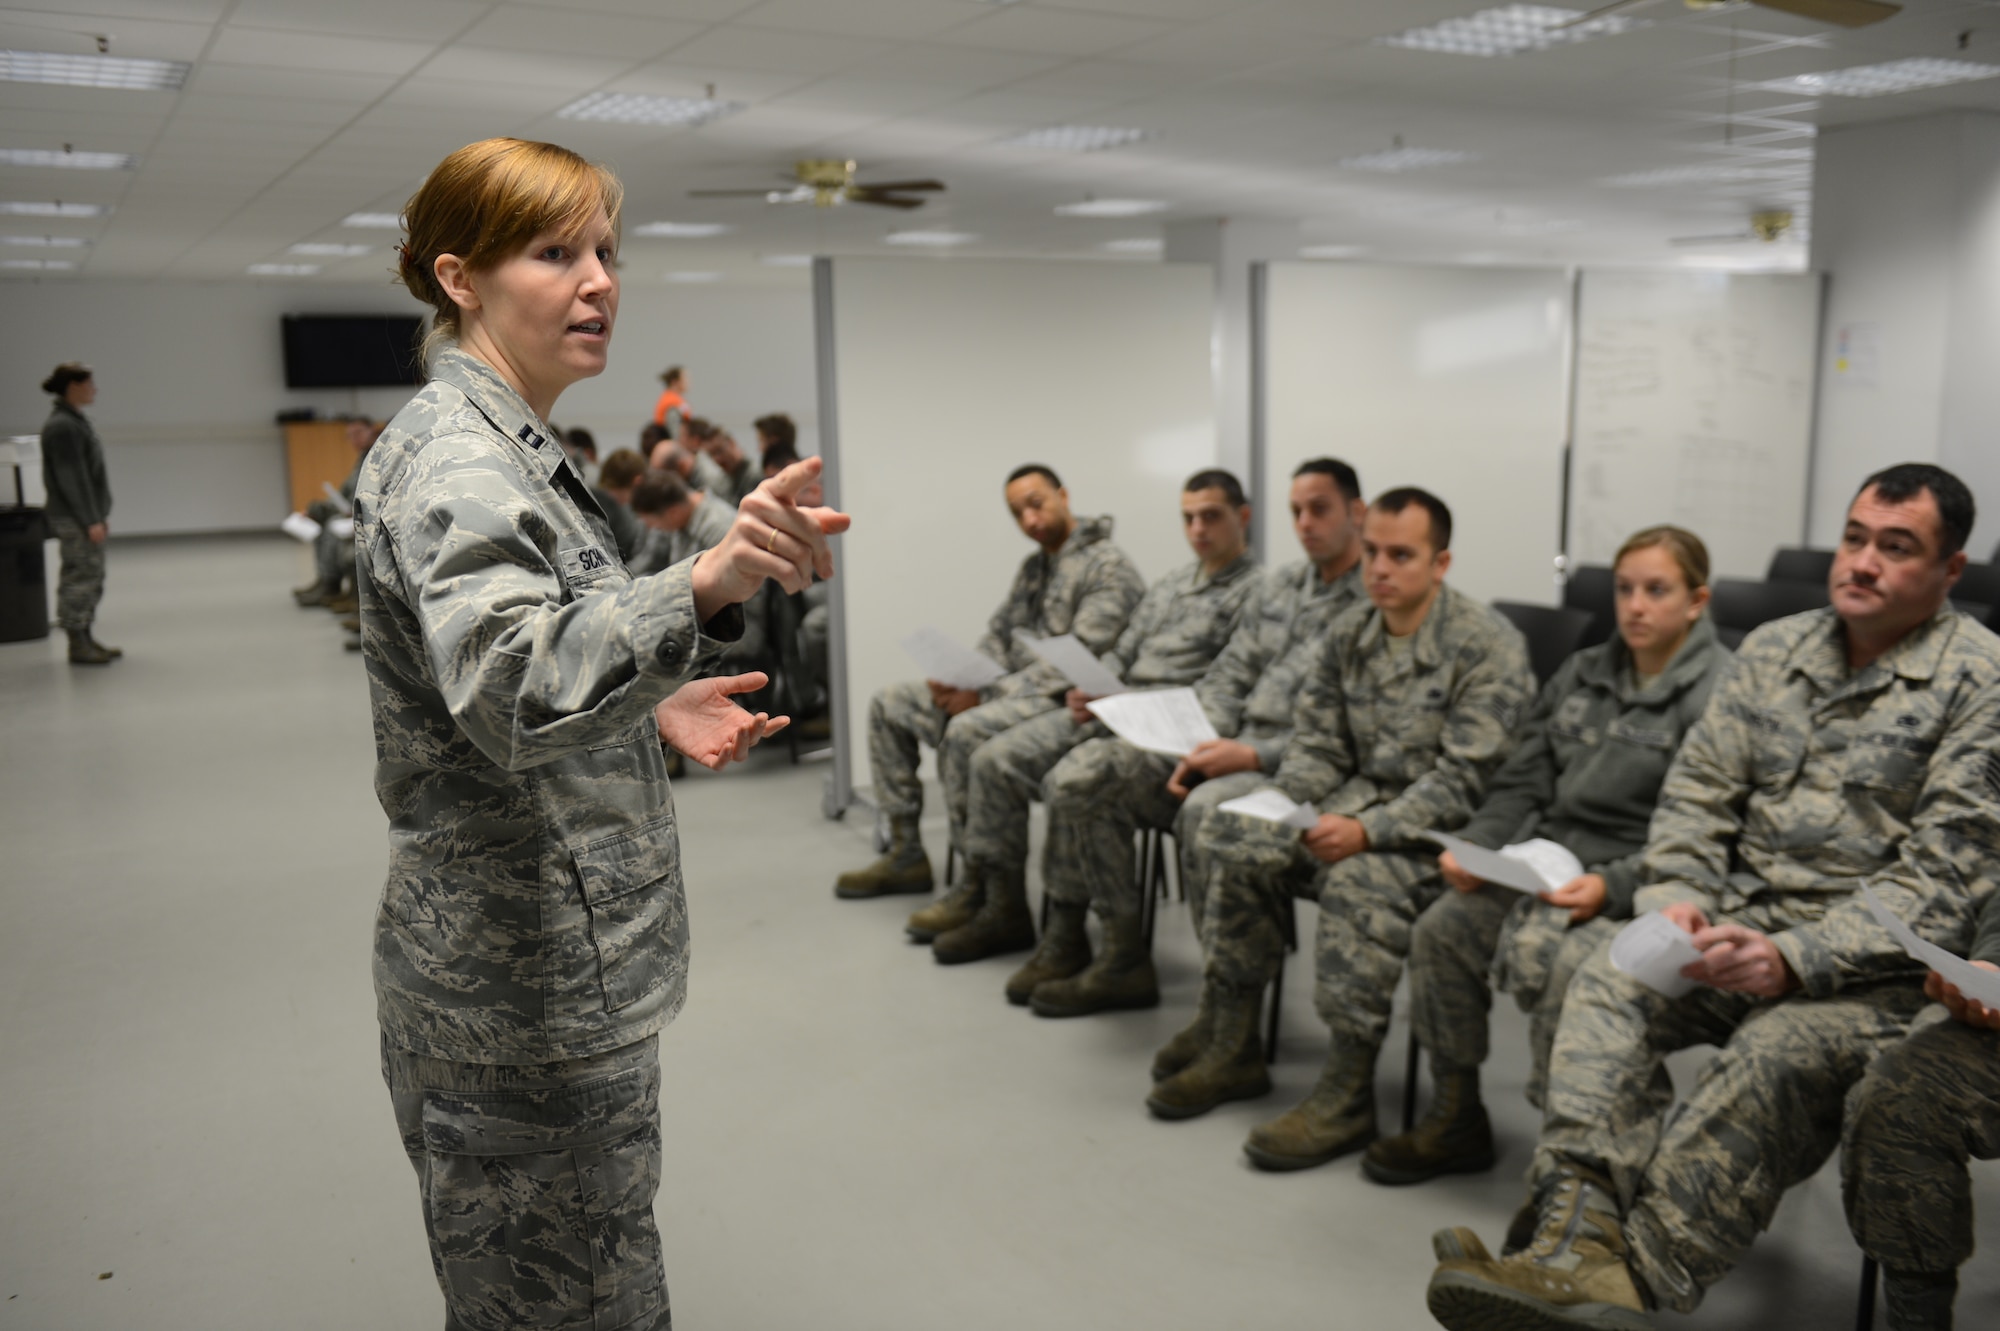 SPANGDAHLEM AIR BASE, Germany – U.S. Air Force Capt. Elizabeth Schnabel, 52nd Medical Operations Squadron clinical audiologist from Medina, Ohio, briefs military members on the point of distribution exercise process Oct. 16, 2013. Exercise participants had to attend the briefing before moving on to the next portion of the exercise. (U.S. Air Force photo by Airman 1st Class Gustavo Castillo/Released) 